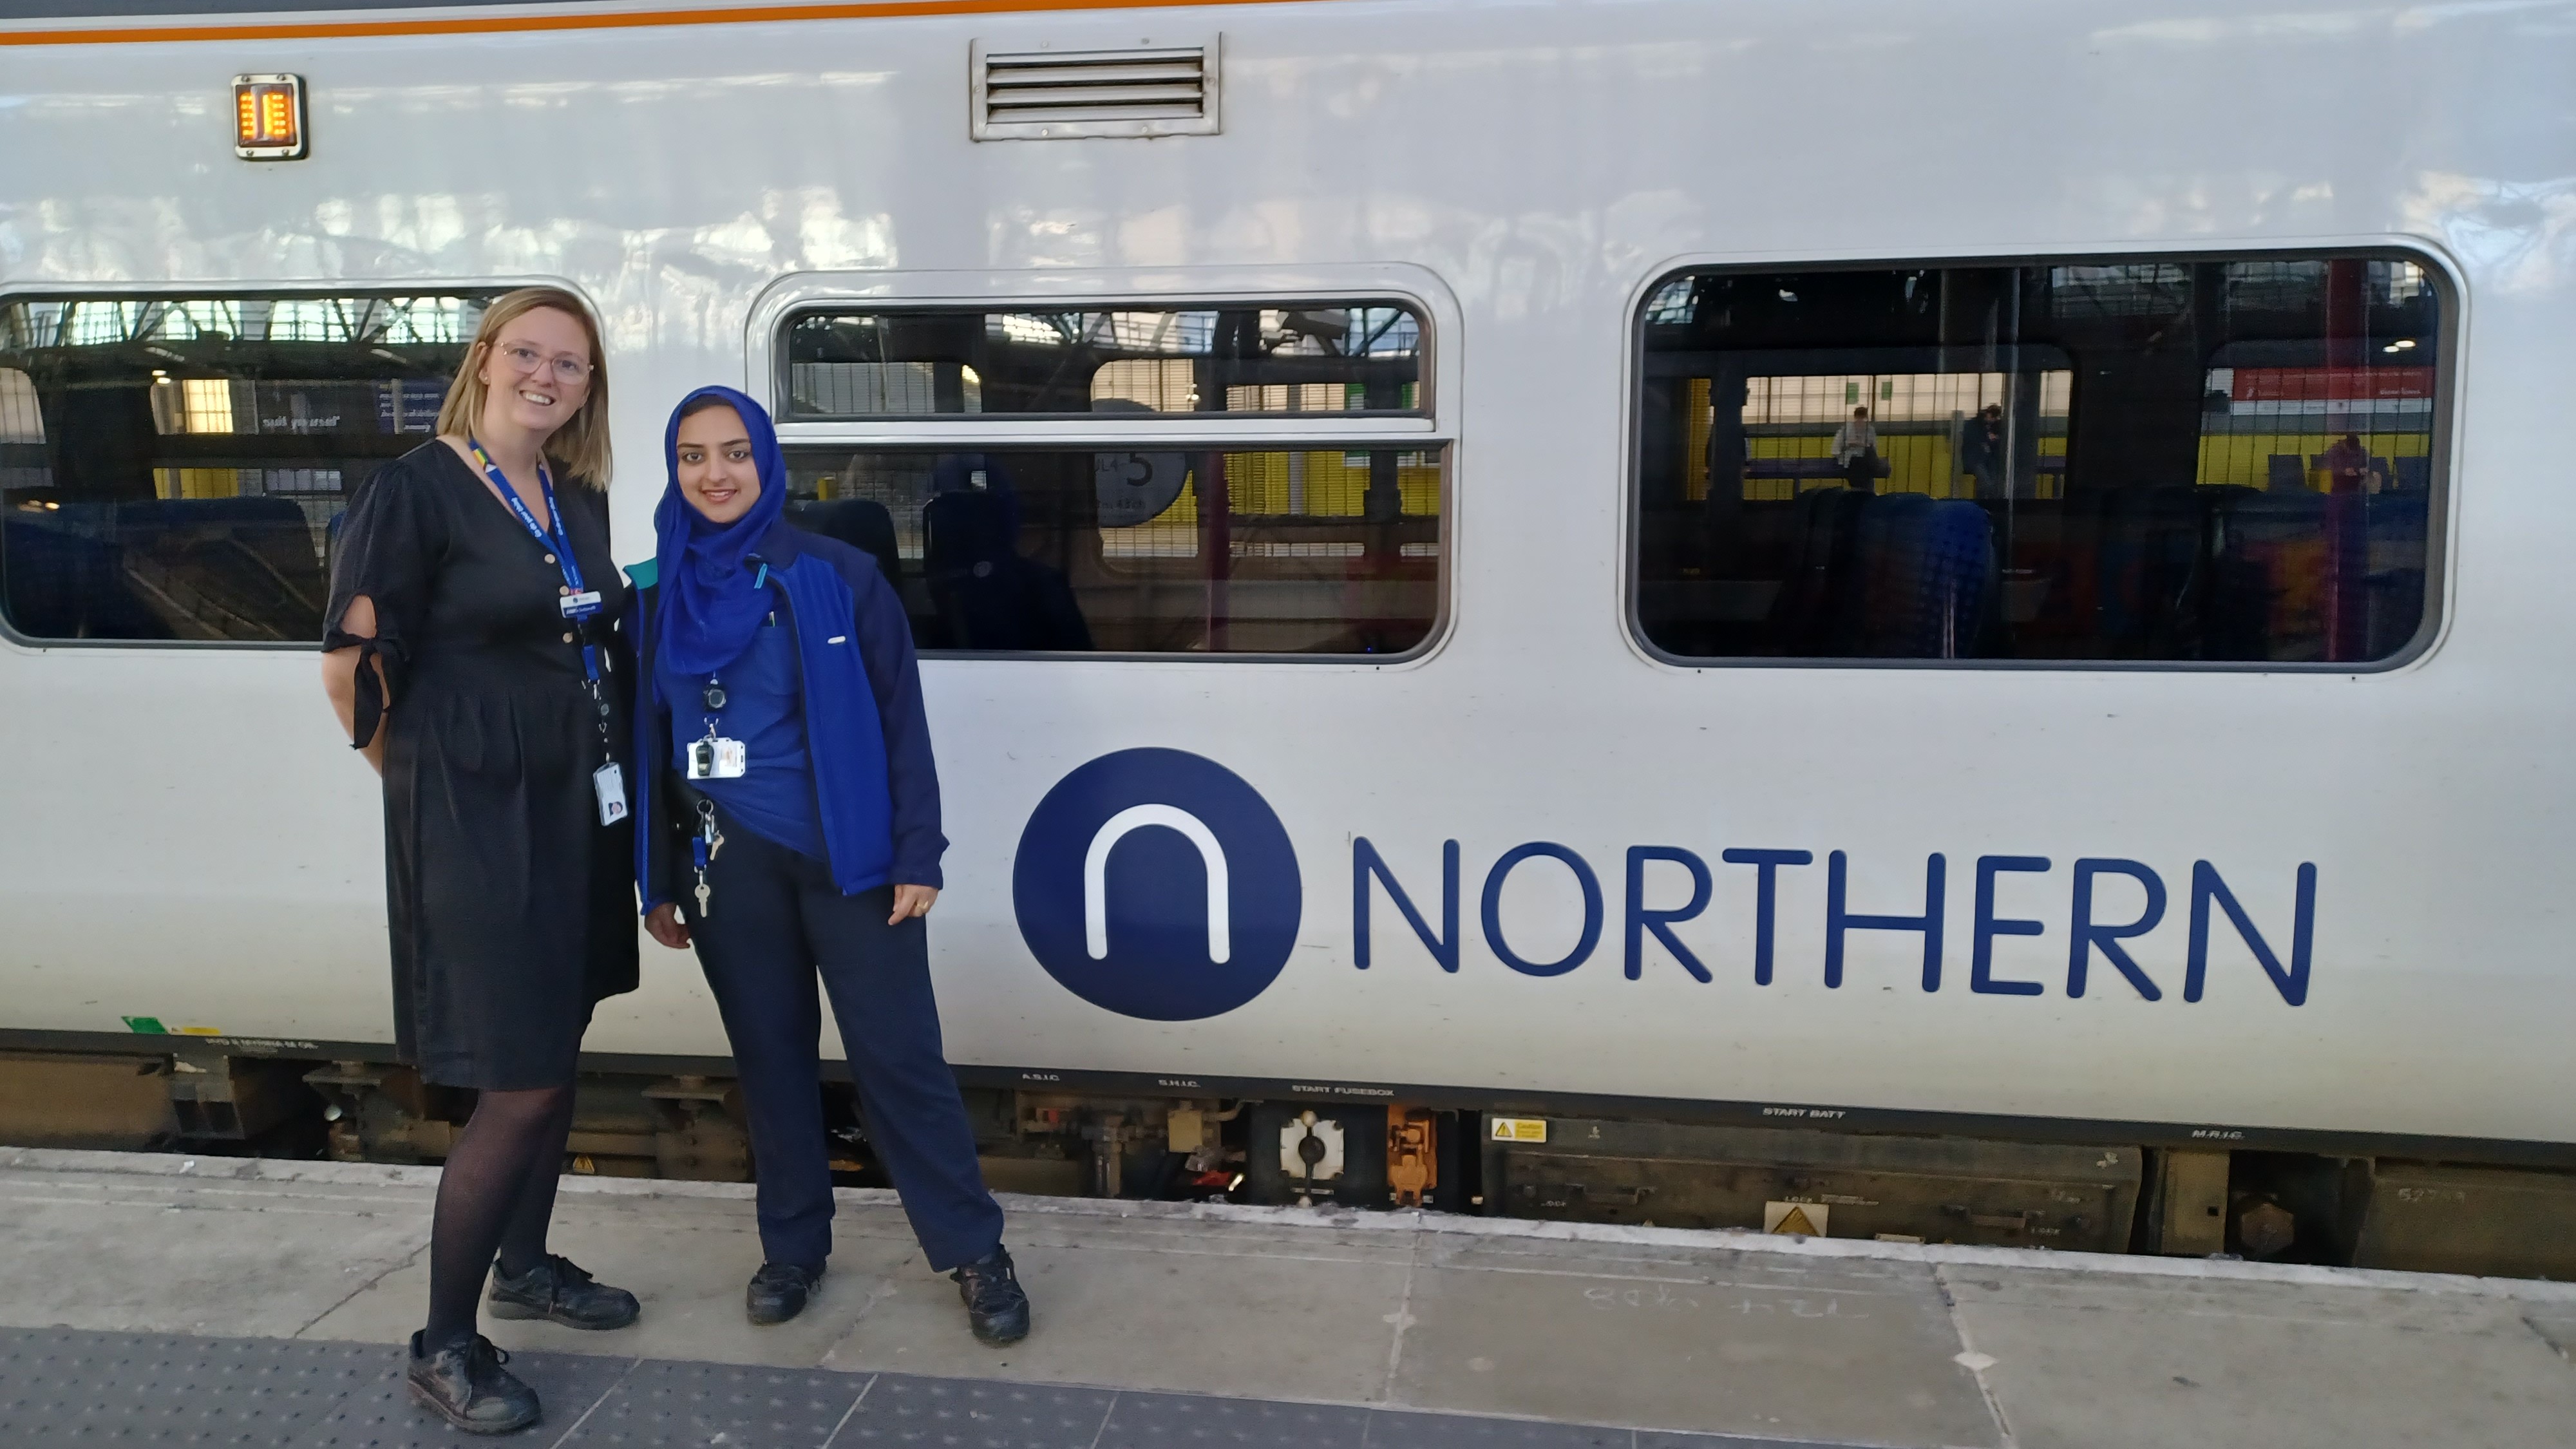 Zahida stands with her manager Kelly Dodsworth next to a Northern train